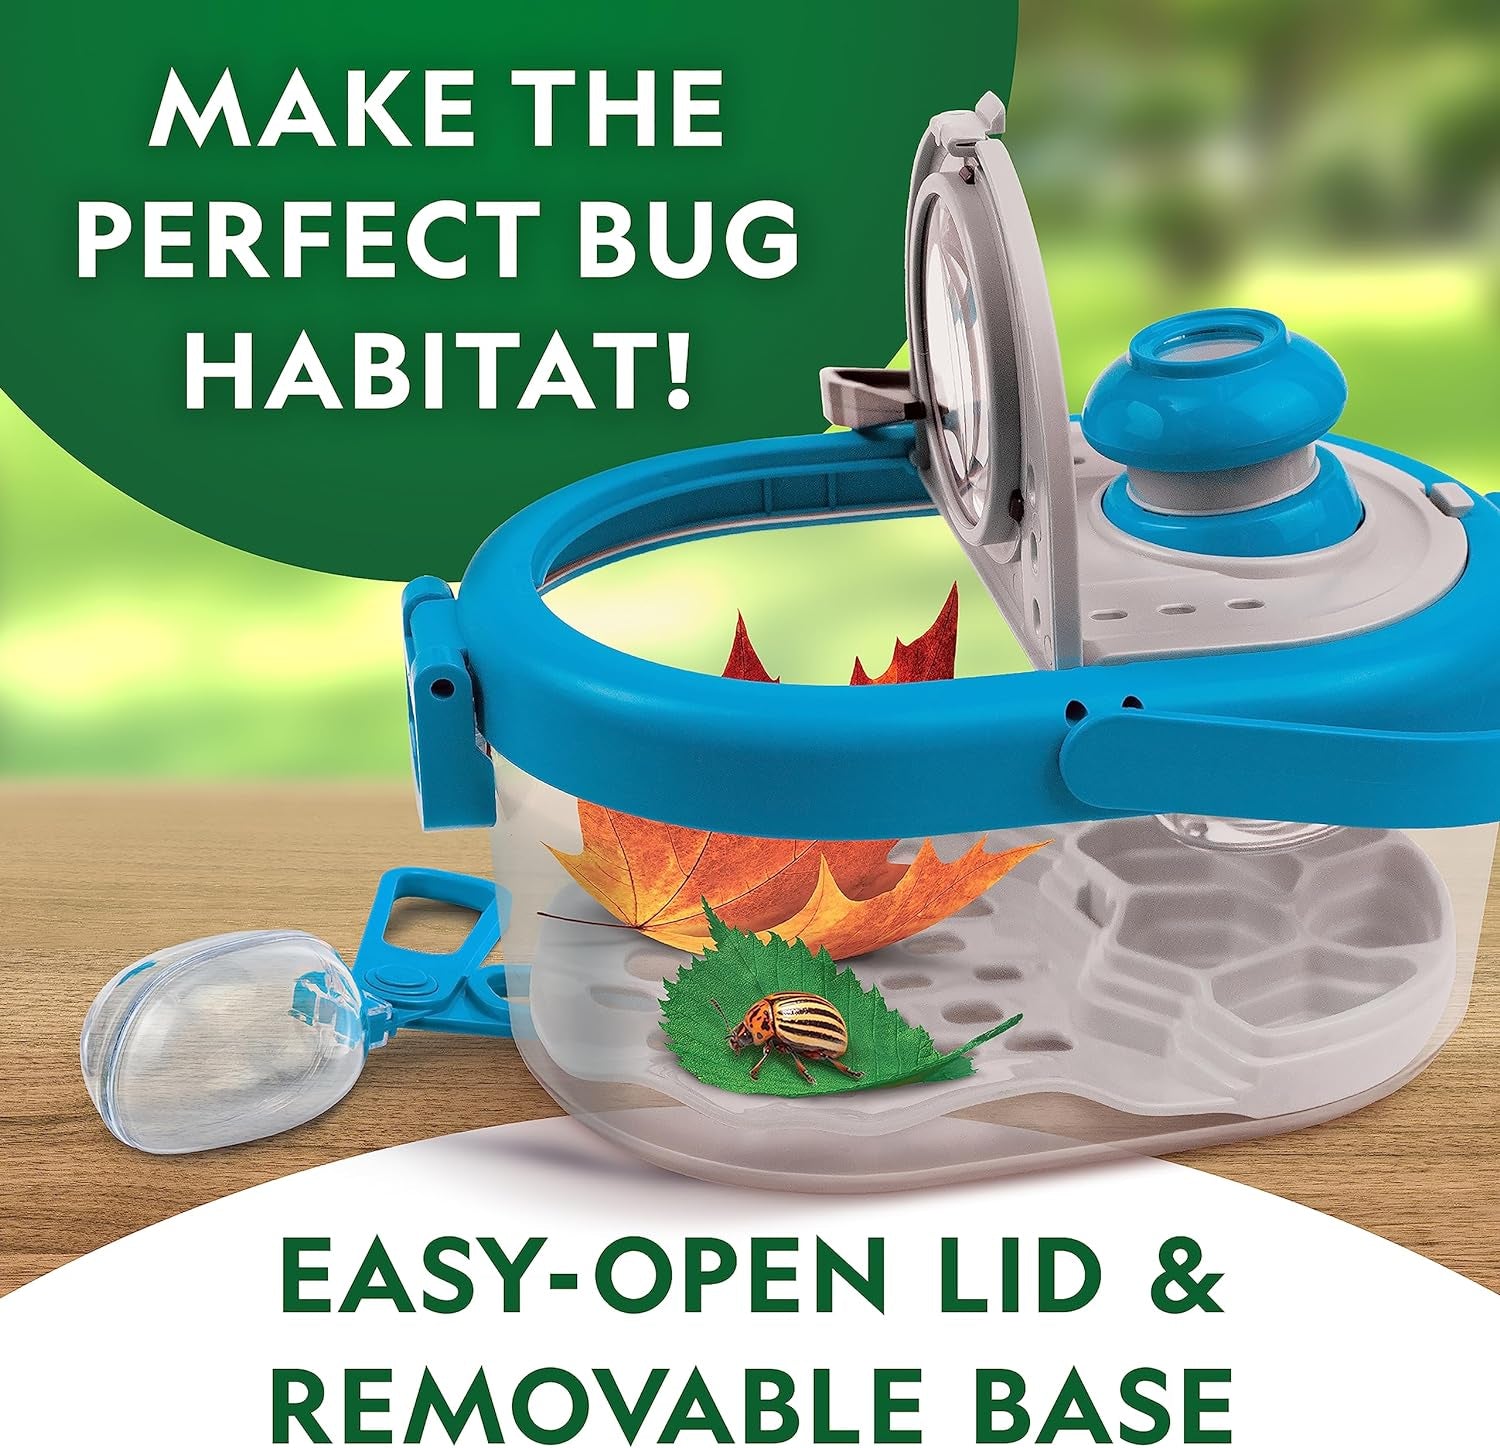 Bug Catcher Kit for Kids - Kids Bug Habitat with Magnified Viewer, Bug Catcher, Tweezers & Learning Guide, Insect Habitat, Outdoor Toys, Kids Bug Catching Kit, Bug Cage, Bug Box